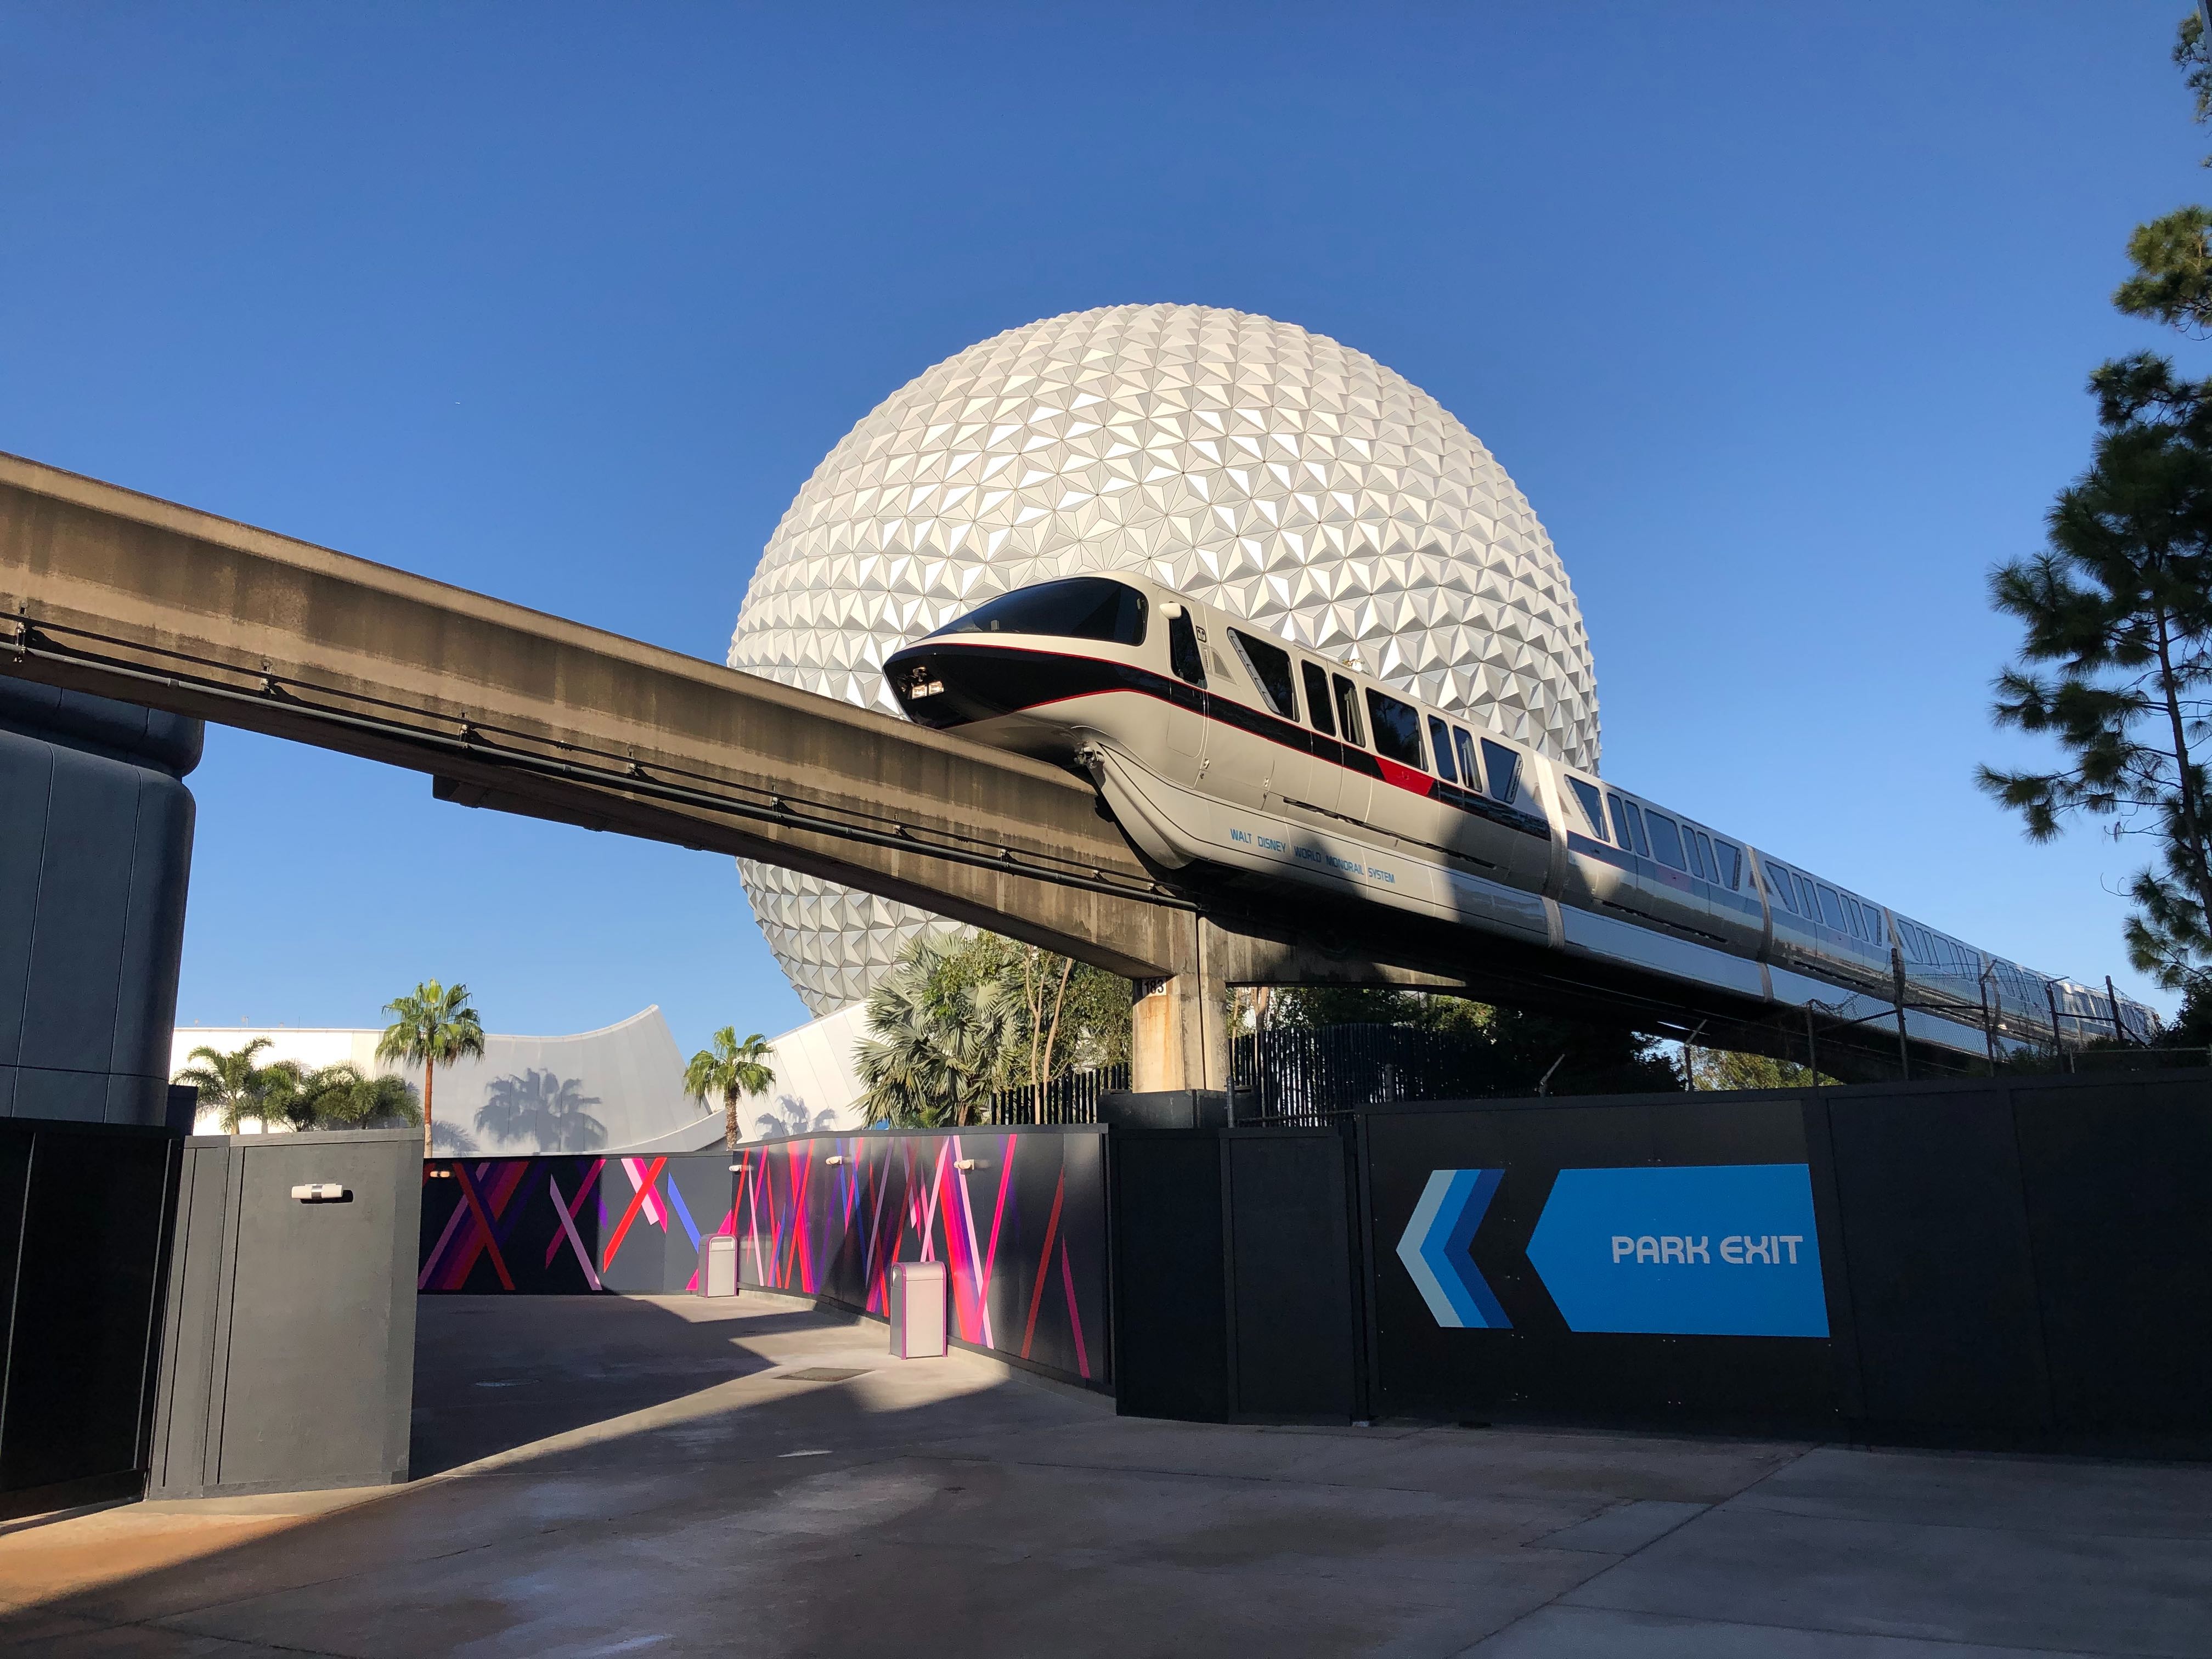 Photos Video New Bypass Walkway Opens At Epcot Connecting Park